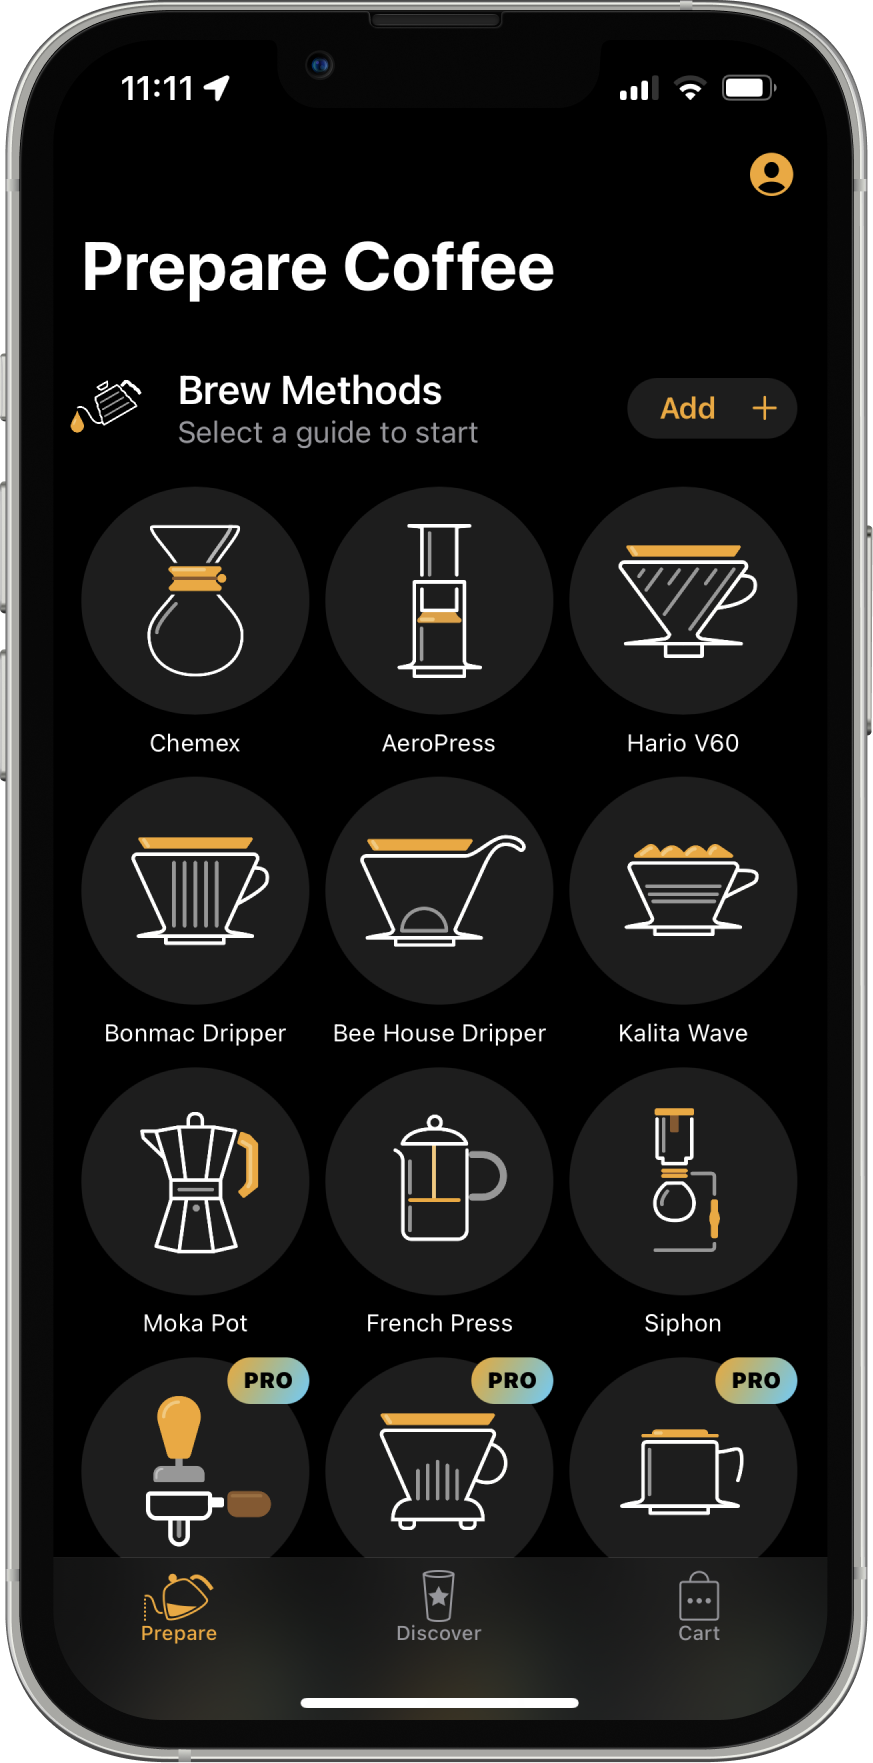 An image of the phone showing the main Filtru screen with a list of brewing methods